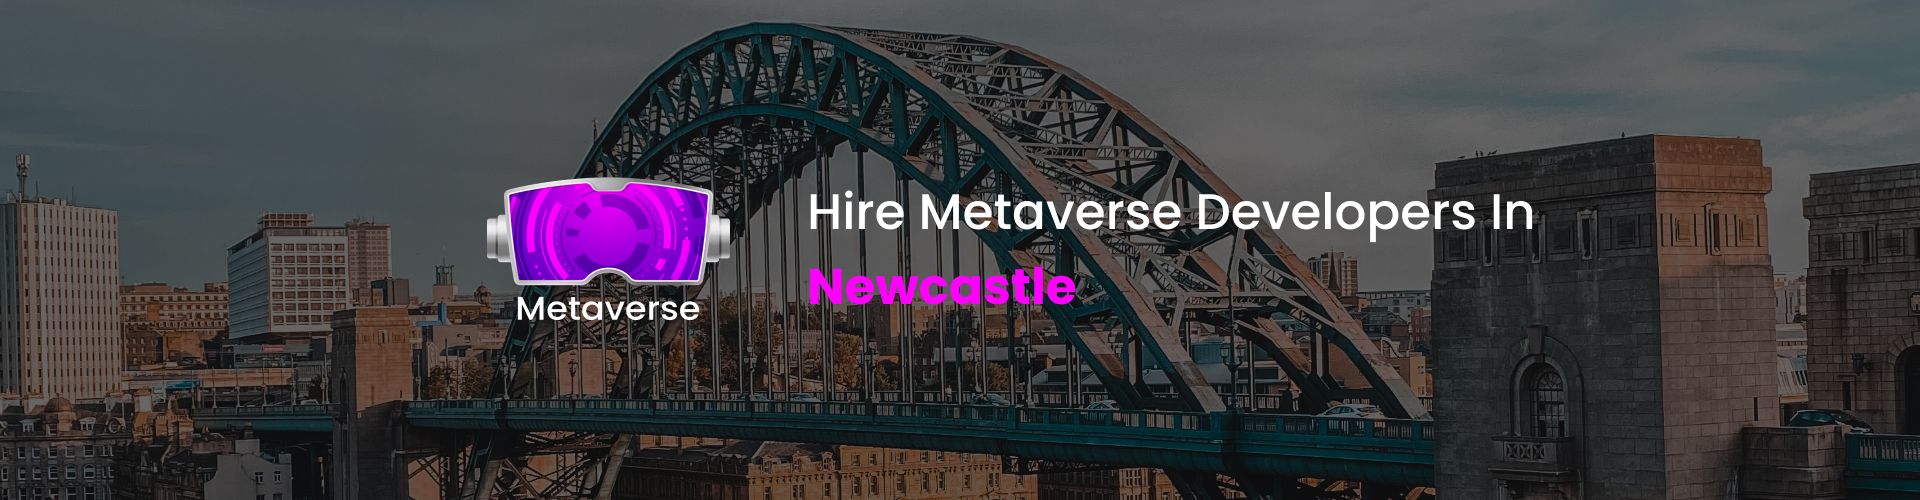 hire metaverse developers in newcastle